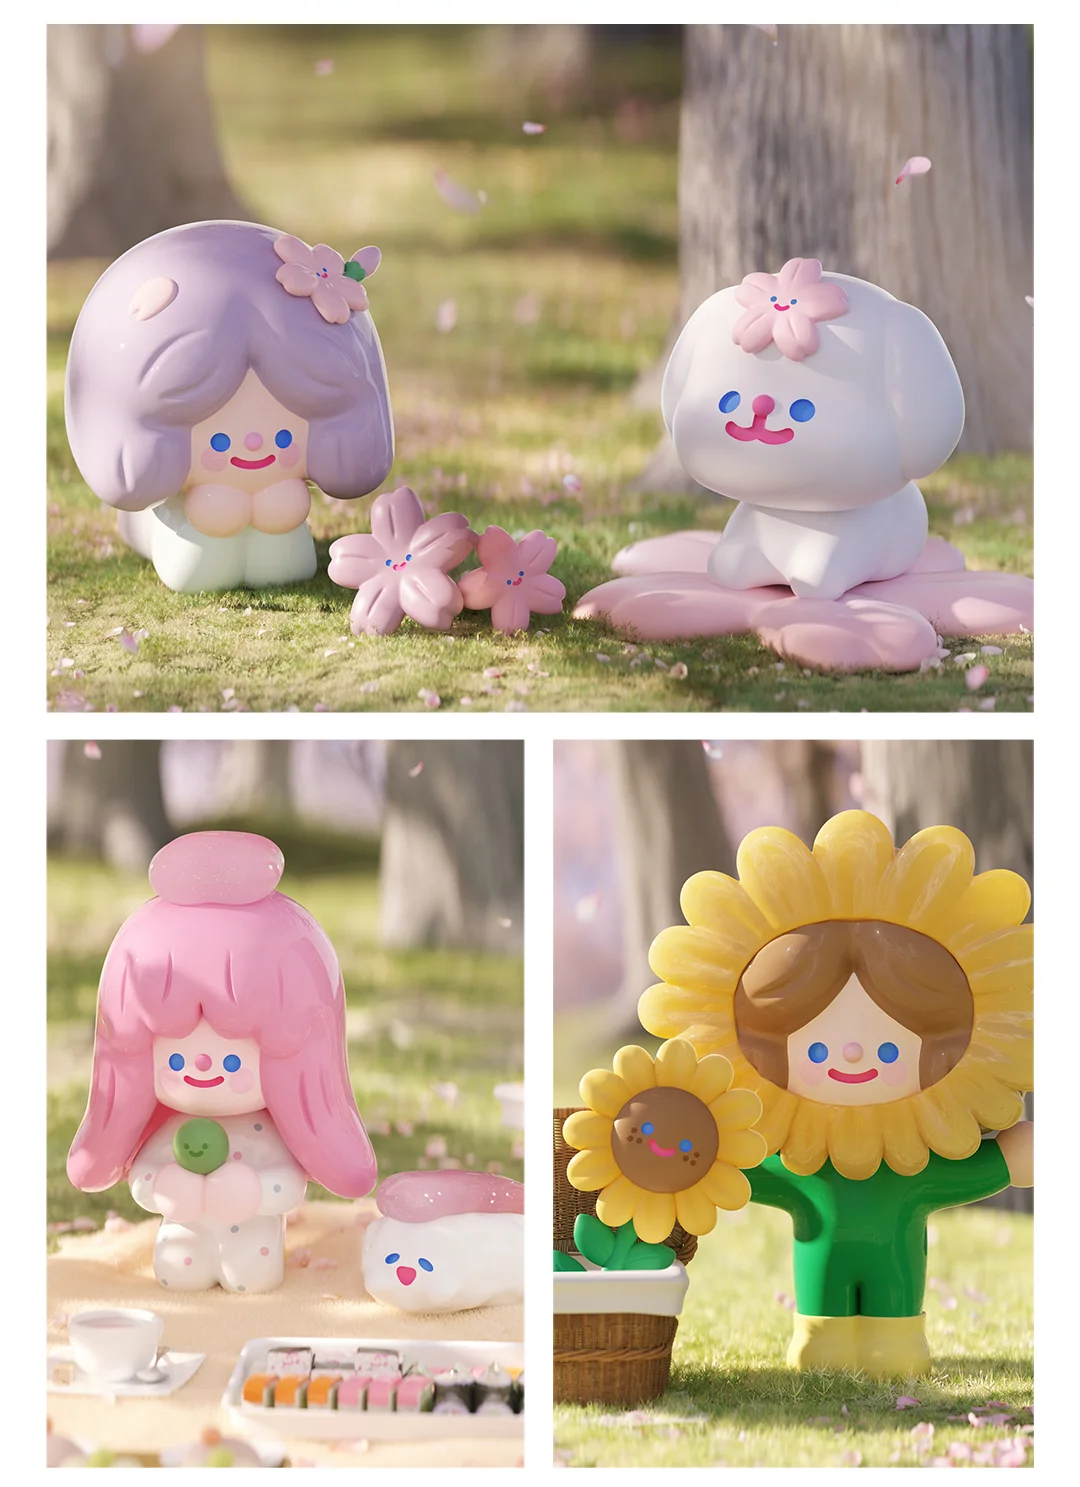 RiCO HAPPY PICNIC TOGETHER Blind Box Series